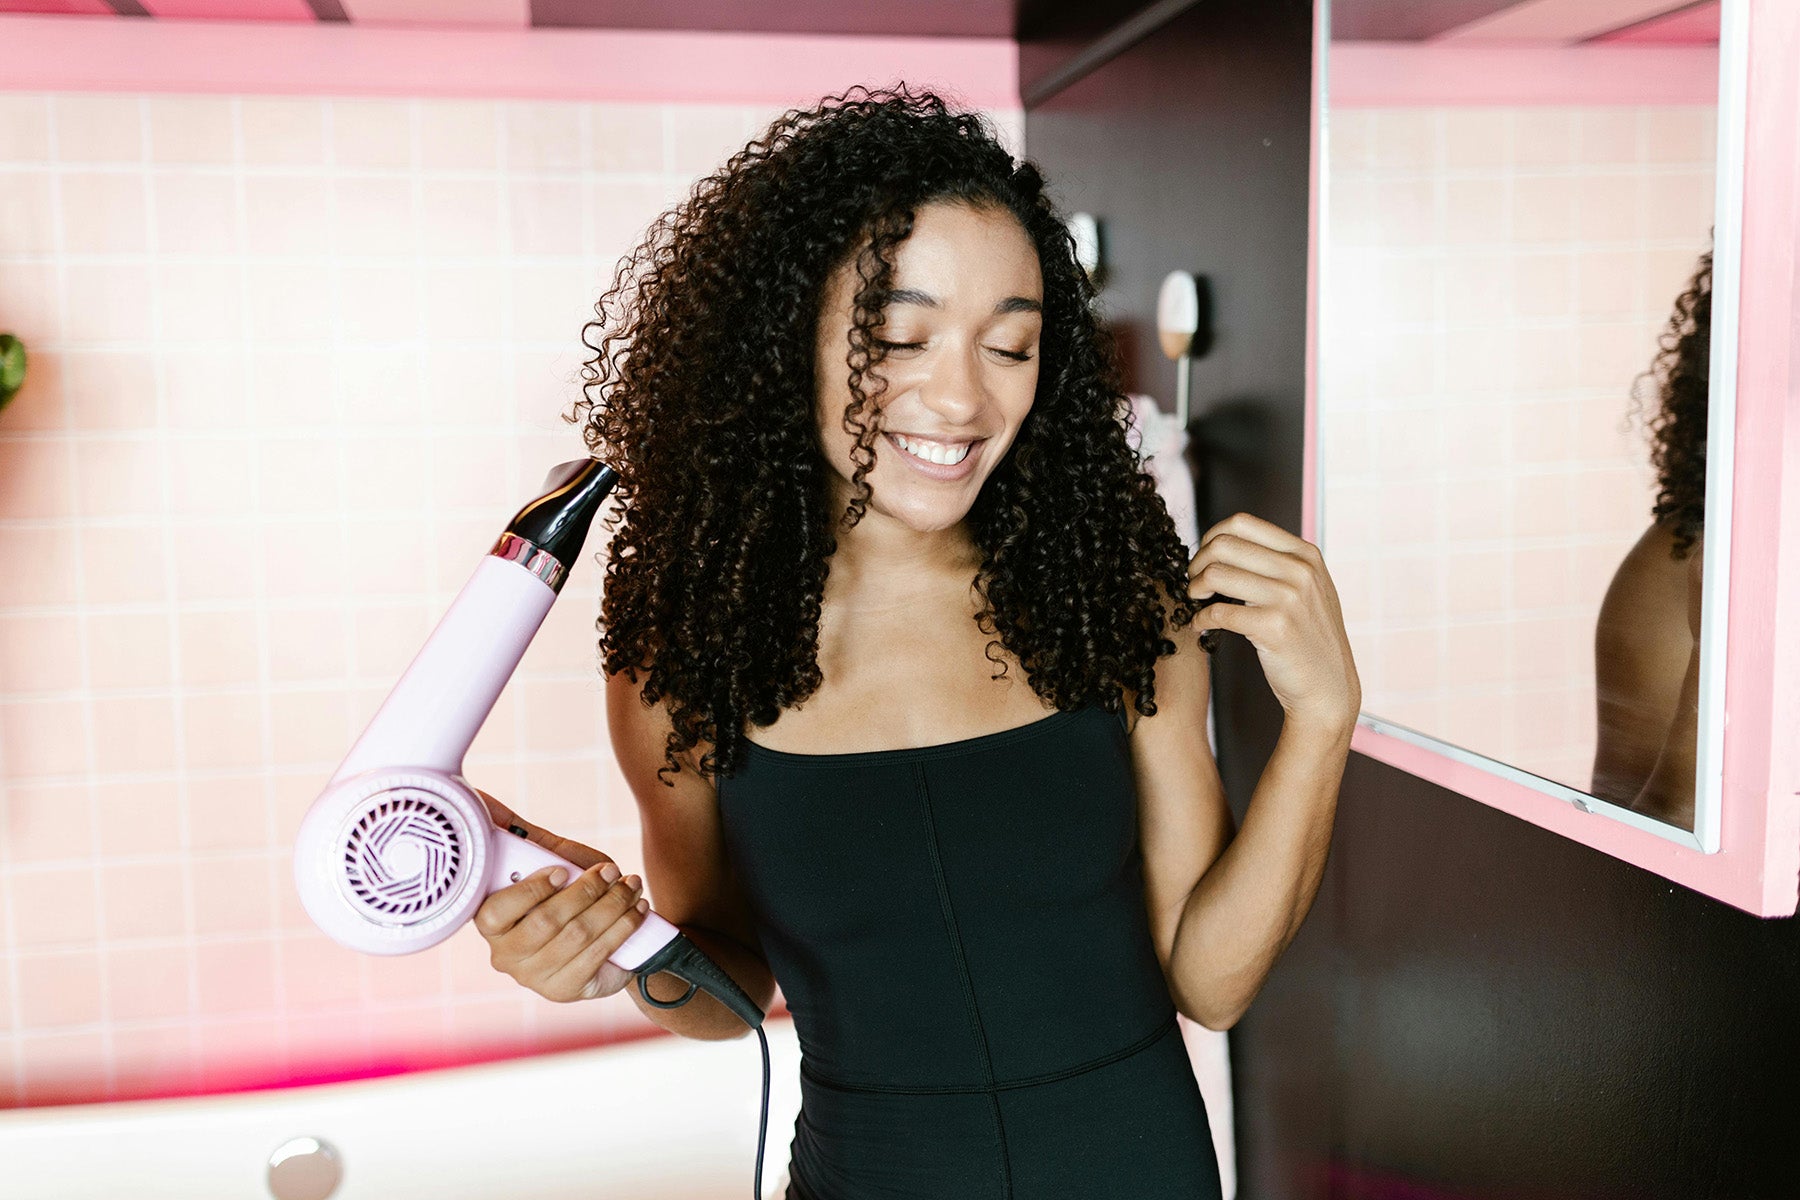 How blow drying can be bad for your hair (+ what to do instead)